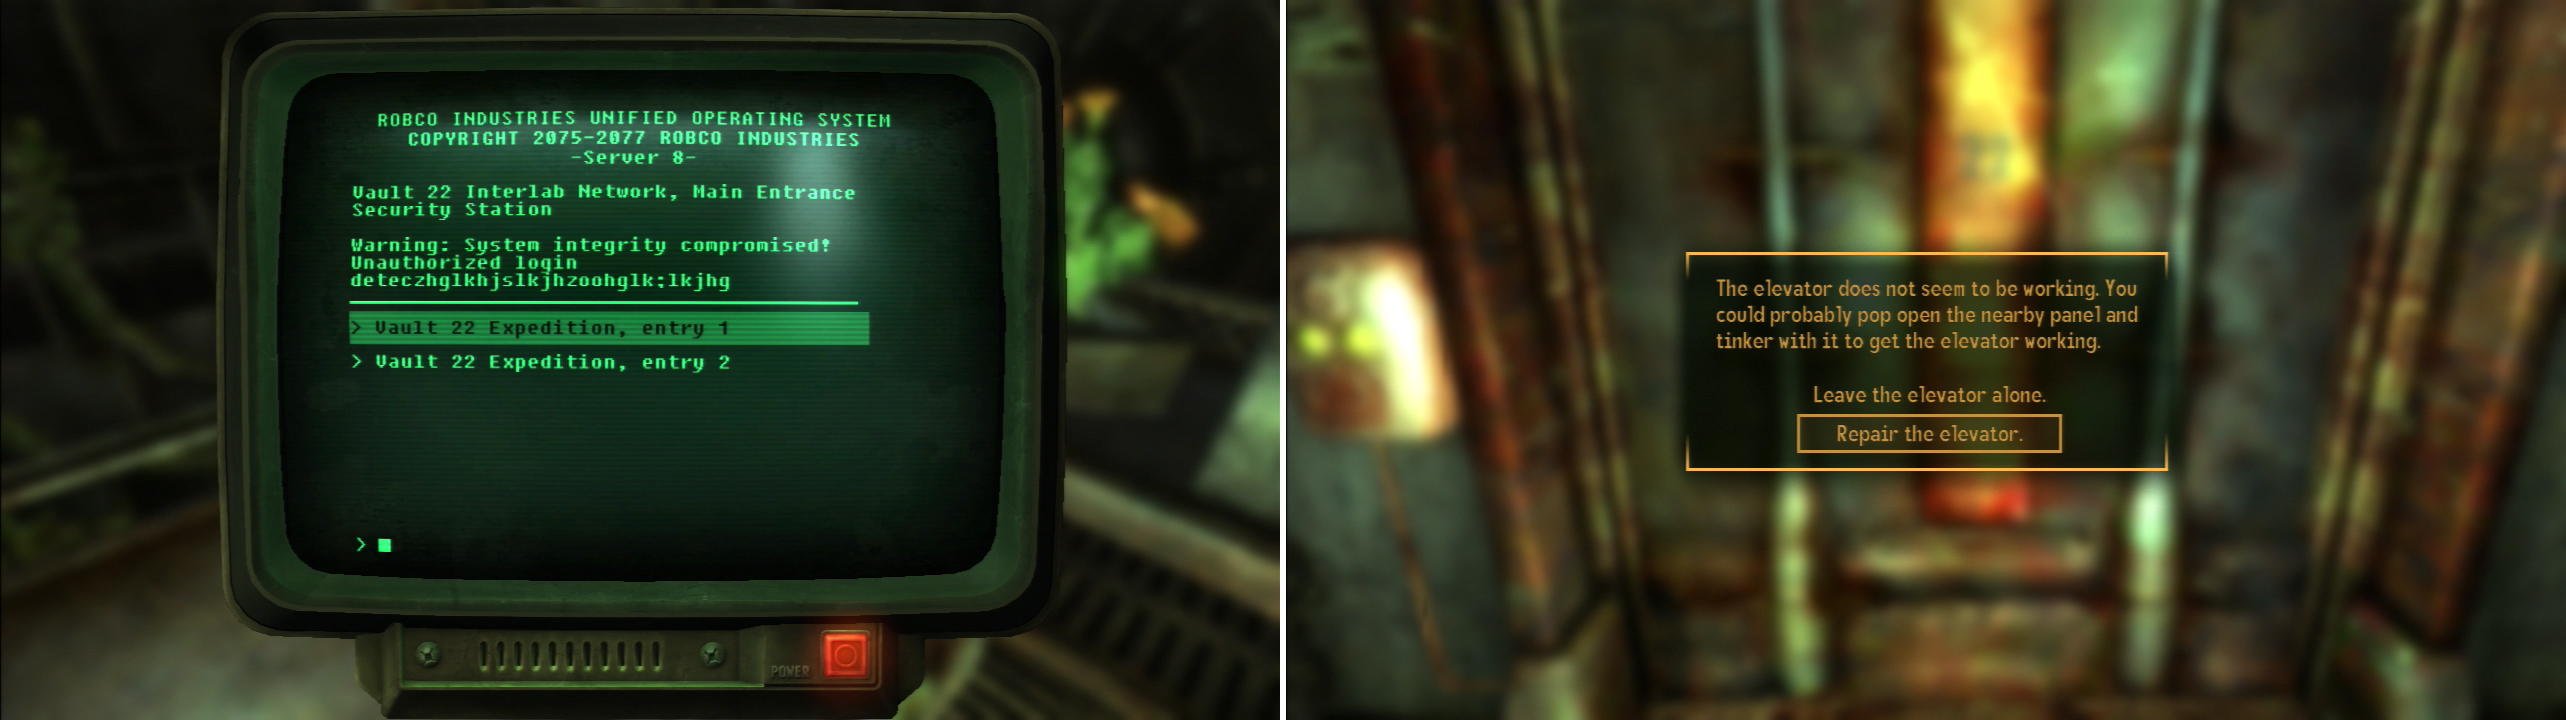 How to Get Unstuck in Fallout 3 and New Vegas: 11 Steps